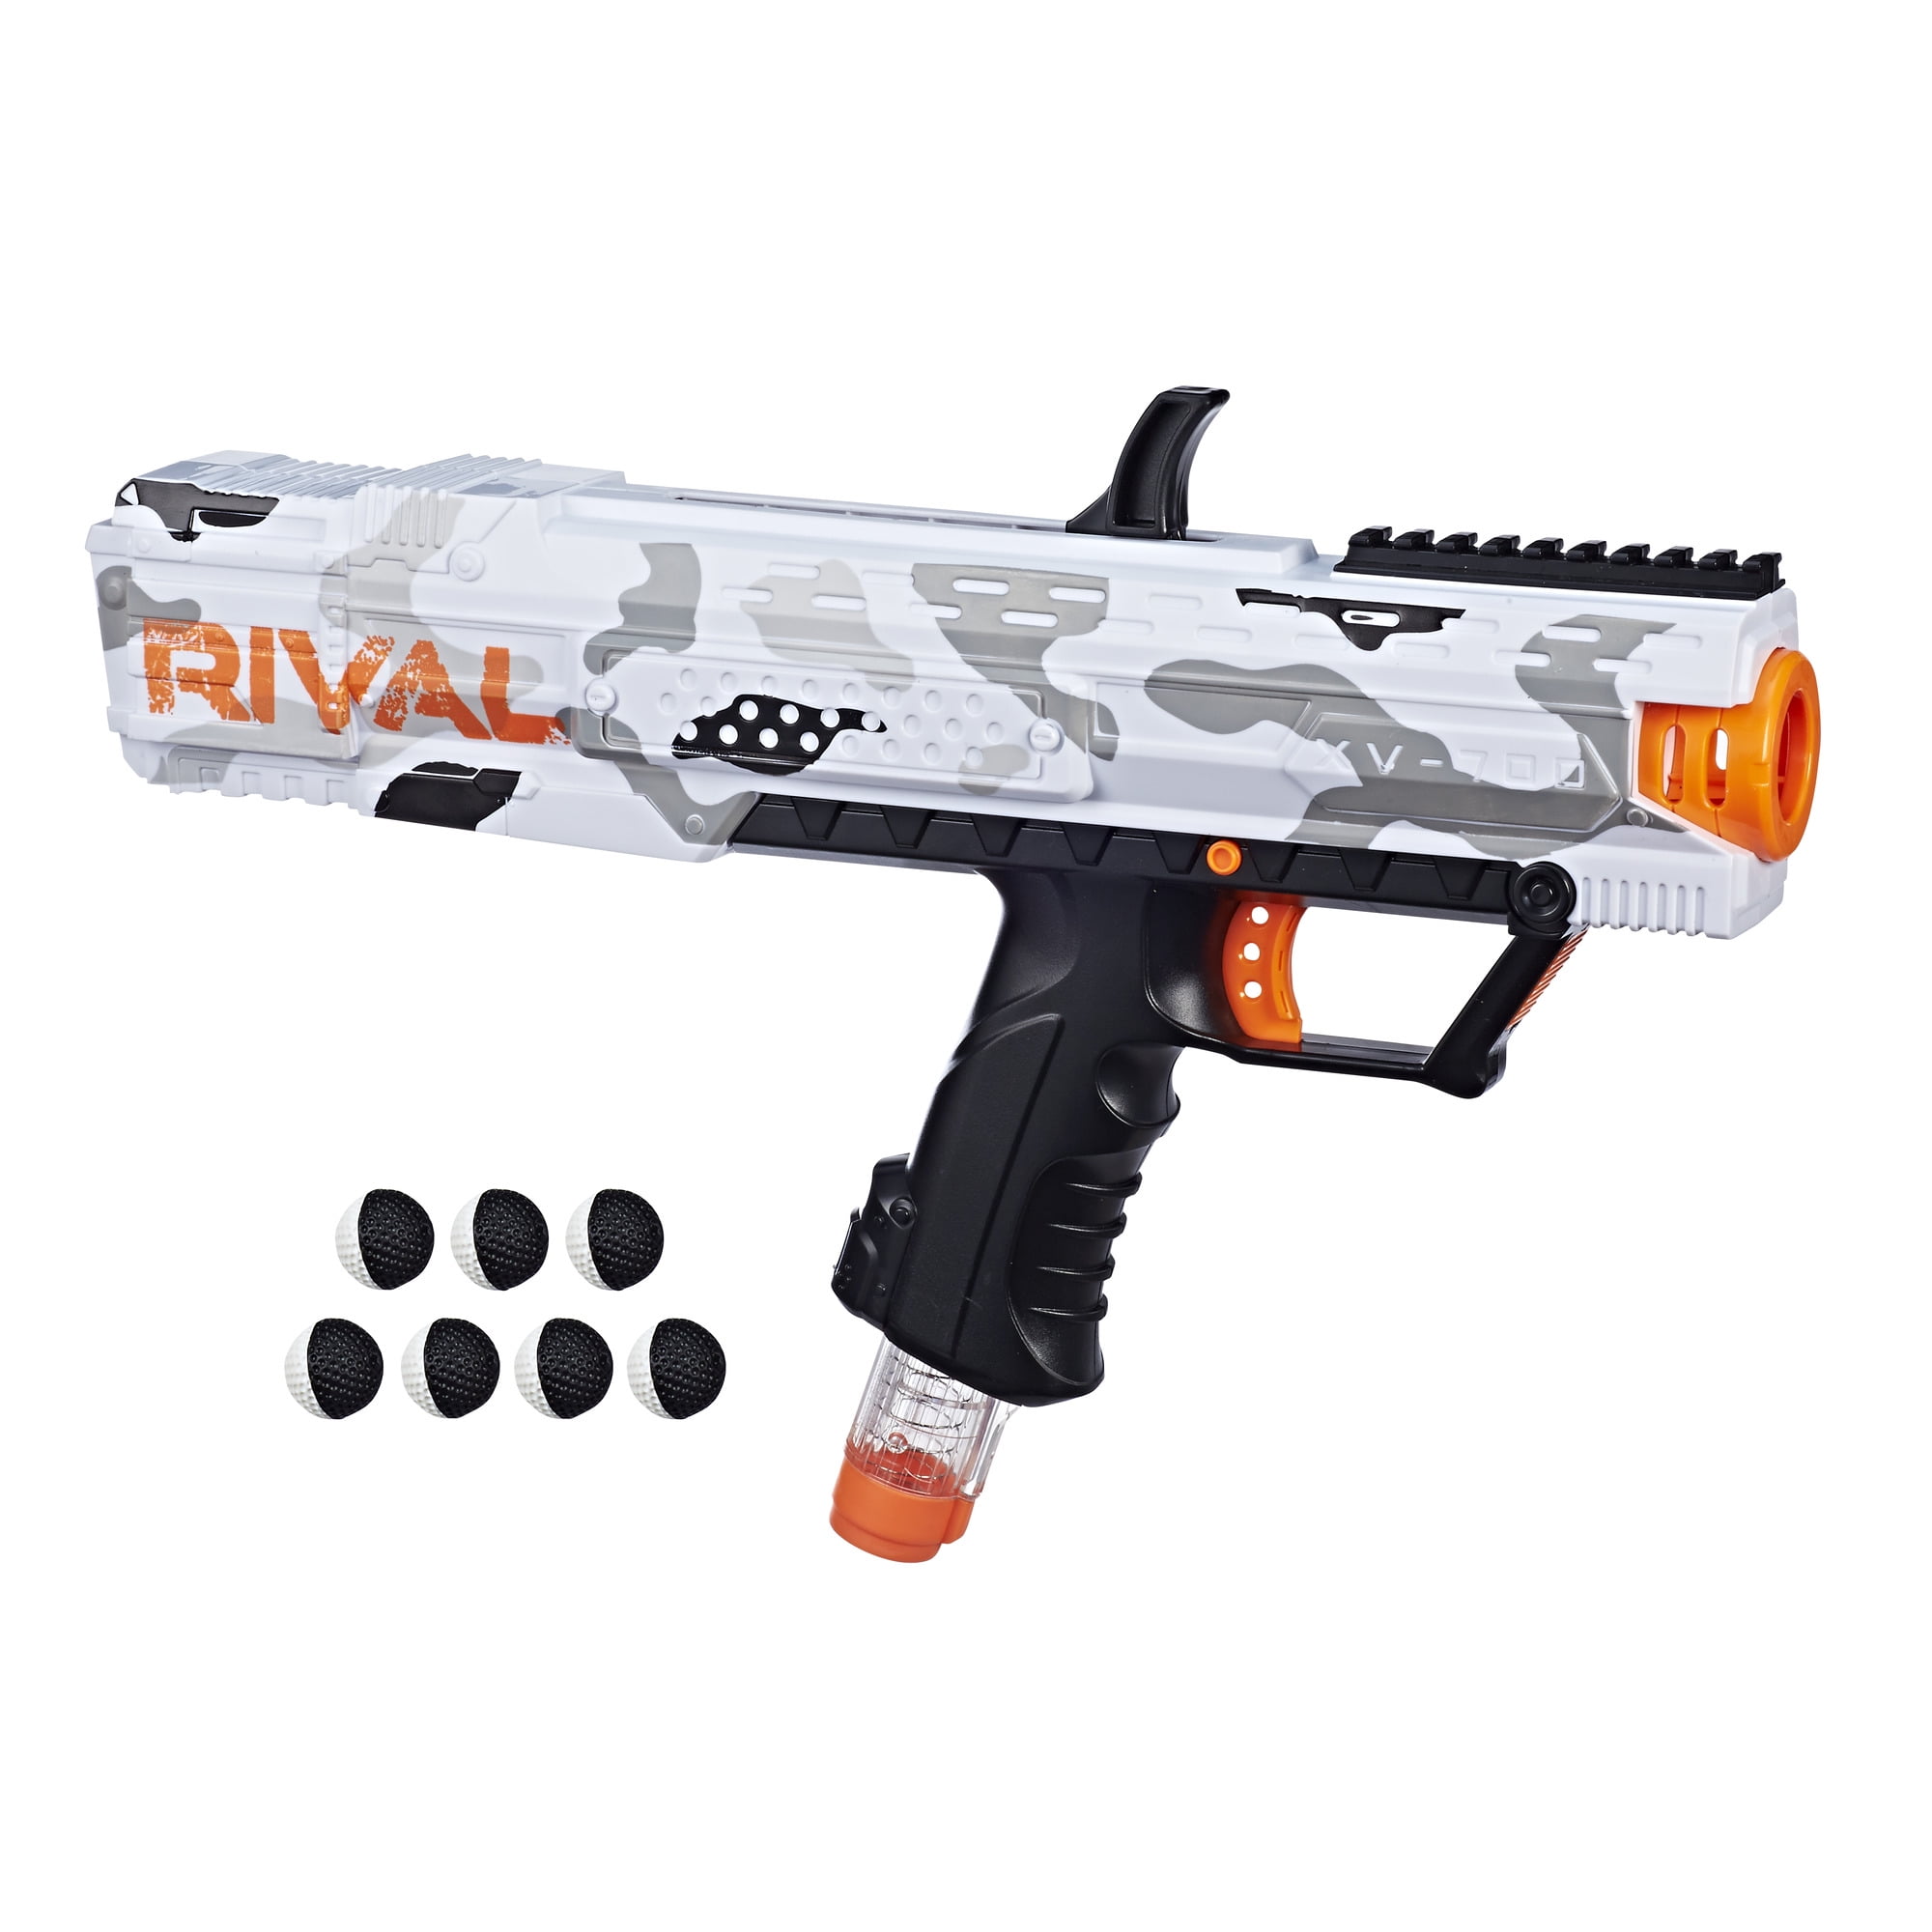 NERF Rival 12 Round Magazine With 2 Clips 18 High Impact Rounds B1594 for sale online 